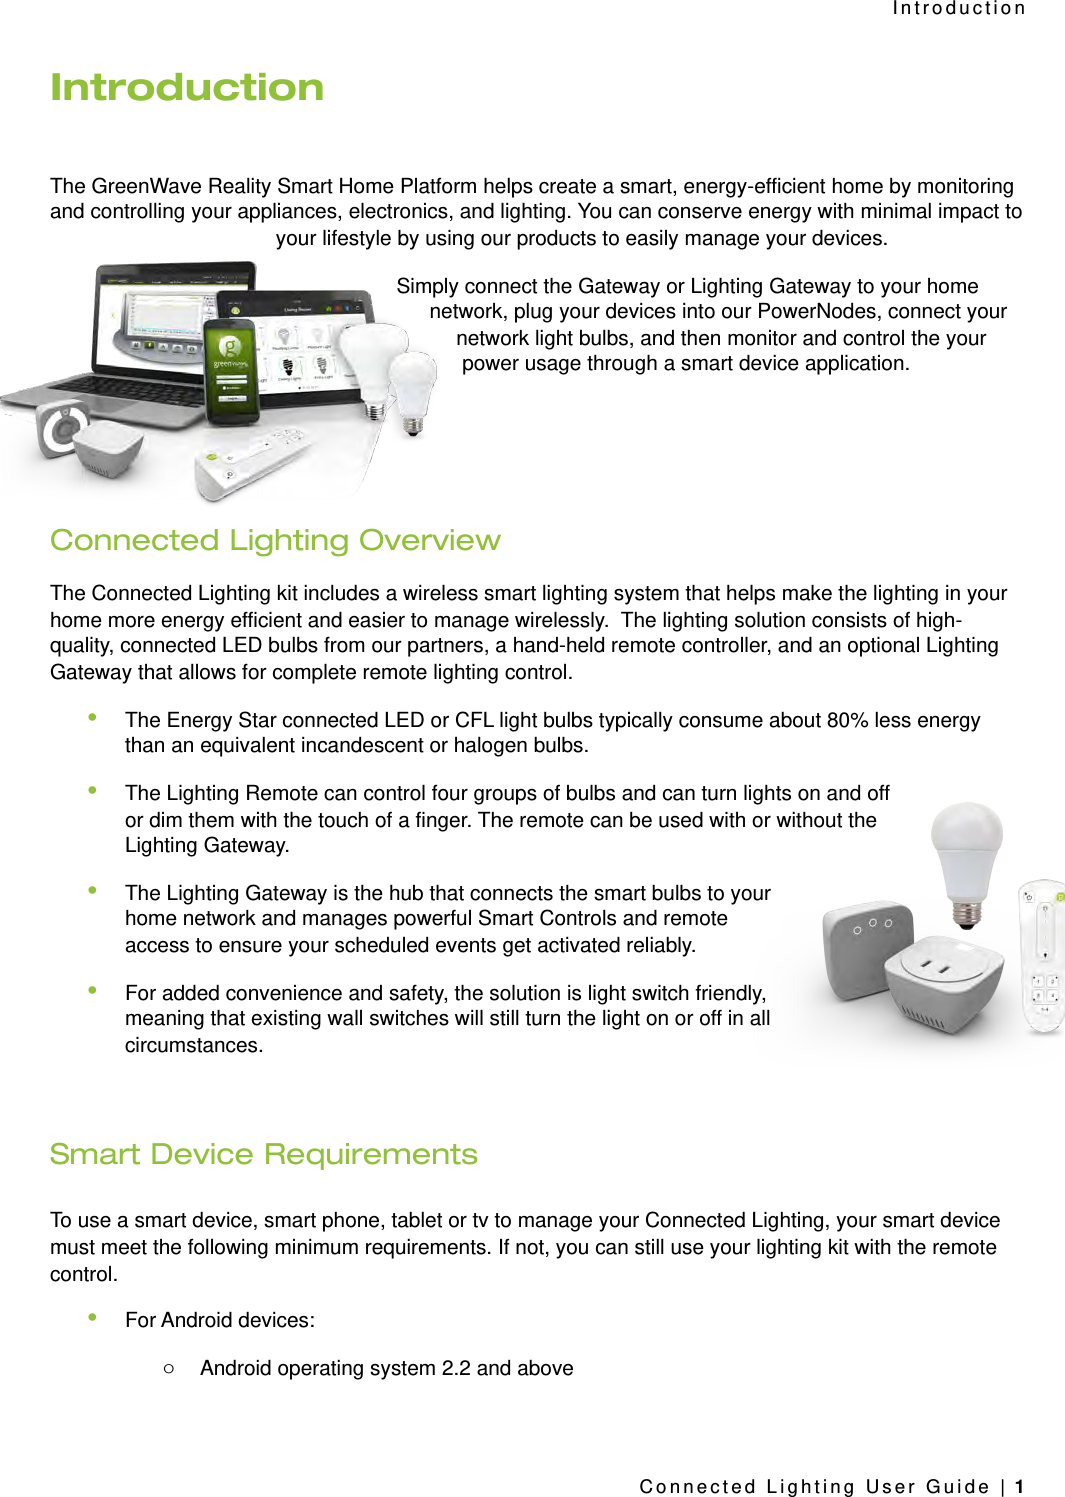 IntroductionThe GreenWave Reality Smart Home Platform helps create a smart, energy-efficient home by monitoring and controlling your appliances, electronics, and lighting. You can conserve energy with minimal impact to your lifestyle by using our products to easily manage your devices. Simply connect the Gateway or Lighting Gateway to your home network, plug your devices into our PowerNodes, connect your network light bulbs, and then monitor and control the your power usage through a smart device application.Connected Lighting OverviewThe Connected Lighting kit includes a wireless smart lighting system that helps make the lighting in your home more energy efficient and easier to manage wirelessly.  The lighting solution consists of high-quality, connected LED bulbs from our partners, a hand-held remote controller, and an optional Lighting Gateway that allows for complete remote lighting control.•The Energy Star connected LED or CFL light bulbs typically consume about 80% less energy than an equivalent incandescent or halogen bulbs. •The Lighting Remote can control four groups of bulbs and can turn lights on and off or dim them with the touch of a finger. The remote can be used with or without the Lighting Gateway.•The Lighting Gateway is the hub that connects the smart bulbs to your home network and manages powerful Smart Controls and remote access to ensure your scheduled events get activated reliably.•For added convenience and safety, the solution is light switch friendly, meaning that existing wall switches will still turn the light on or off in all circumstances. Smart Device RequirementsTo use a smart device, smart phone, tablet or tv to manage your Connected Lighting, your smart device must meet the following minimum requirements. If not, you can still use your lighting kit with the remote control.•For Android devices:oAndroid operating system 2.2 and aboveIntroductionConnected Lighting User Guide | 1